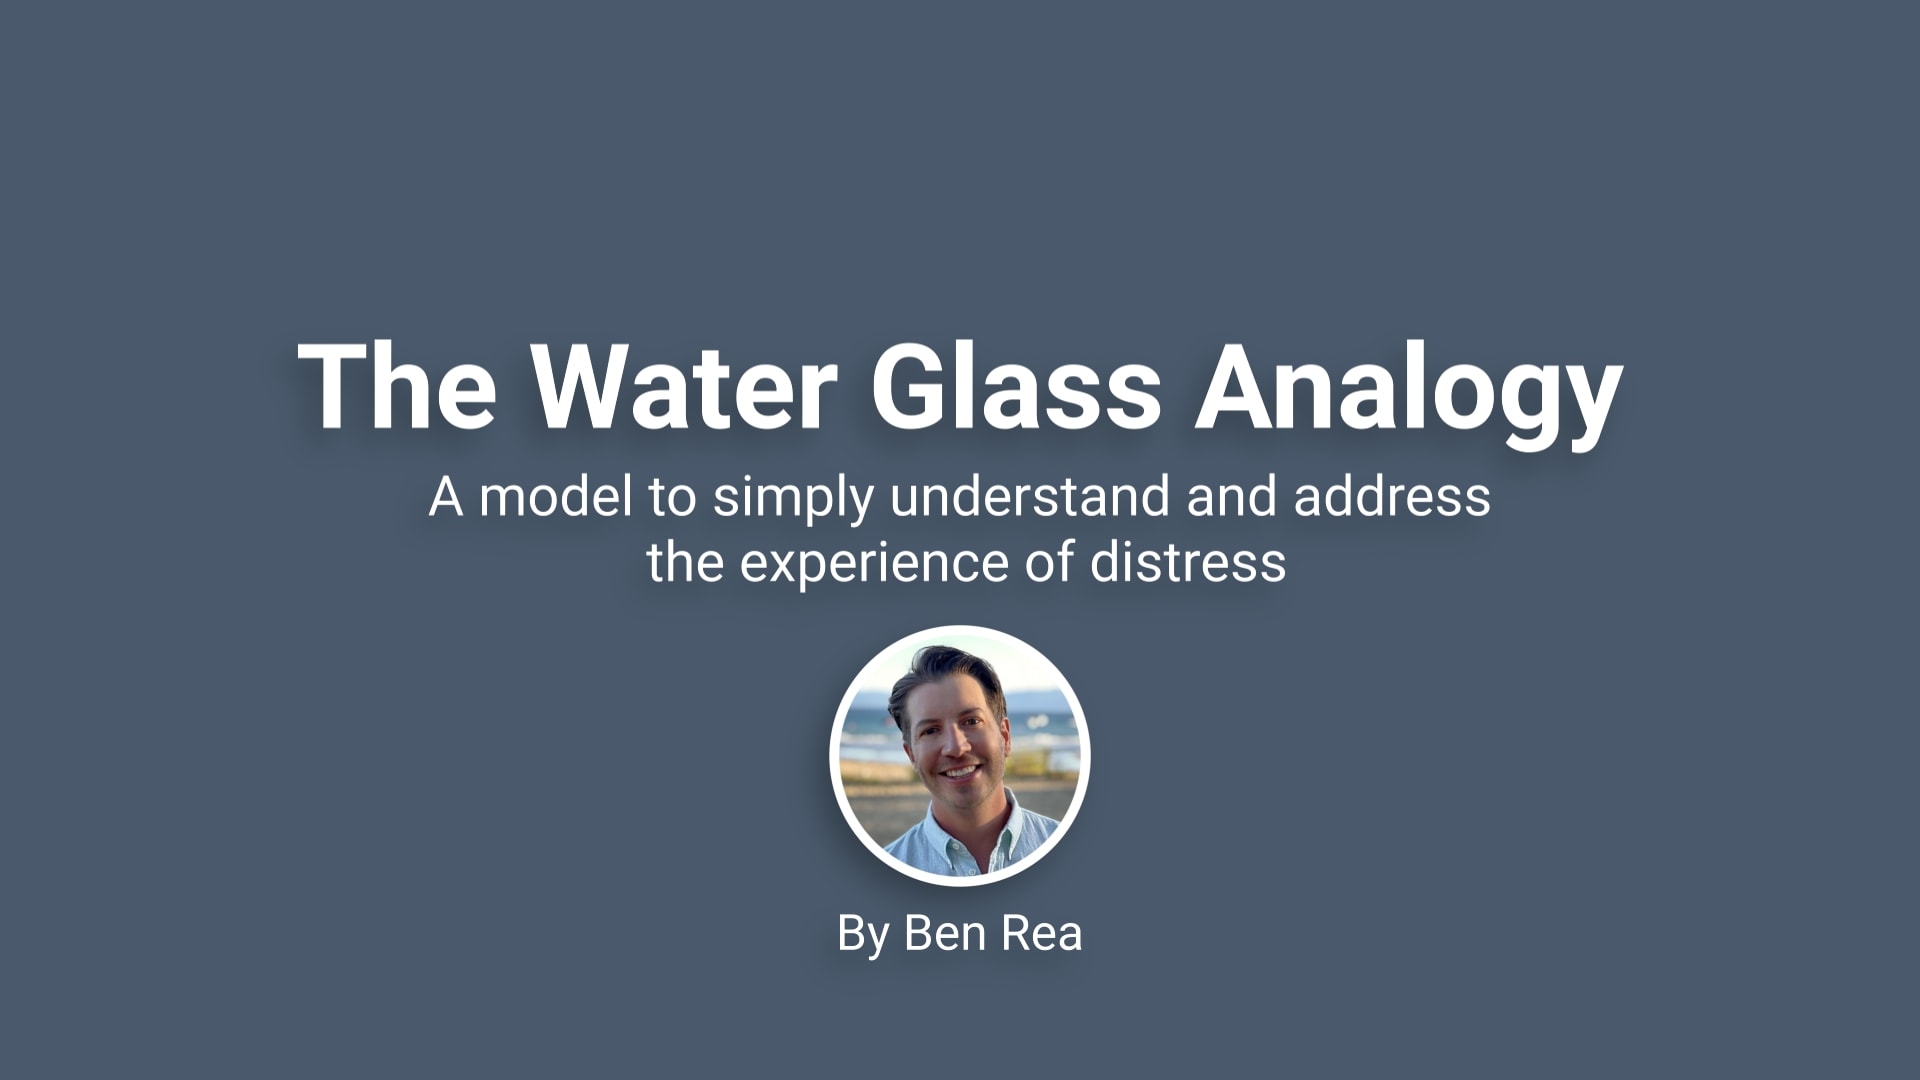 The Water Glass Analogy: A model to simply understand and address the experience of distress